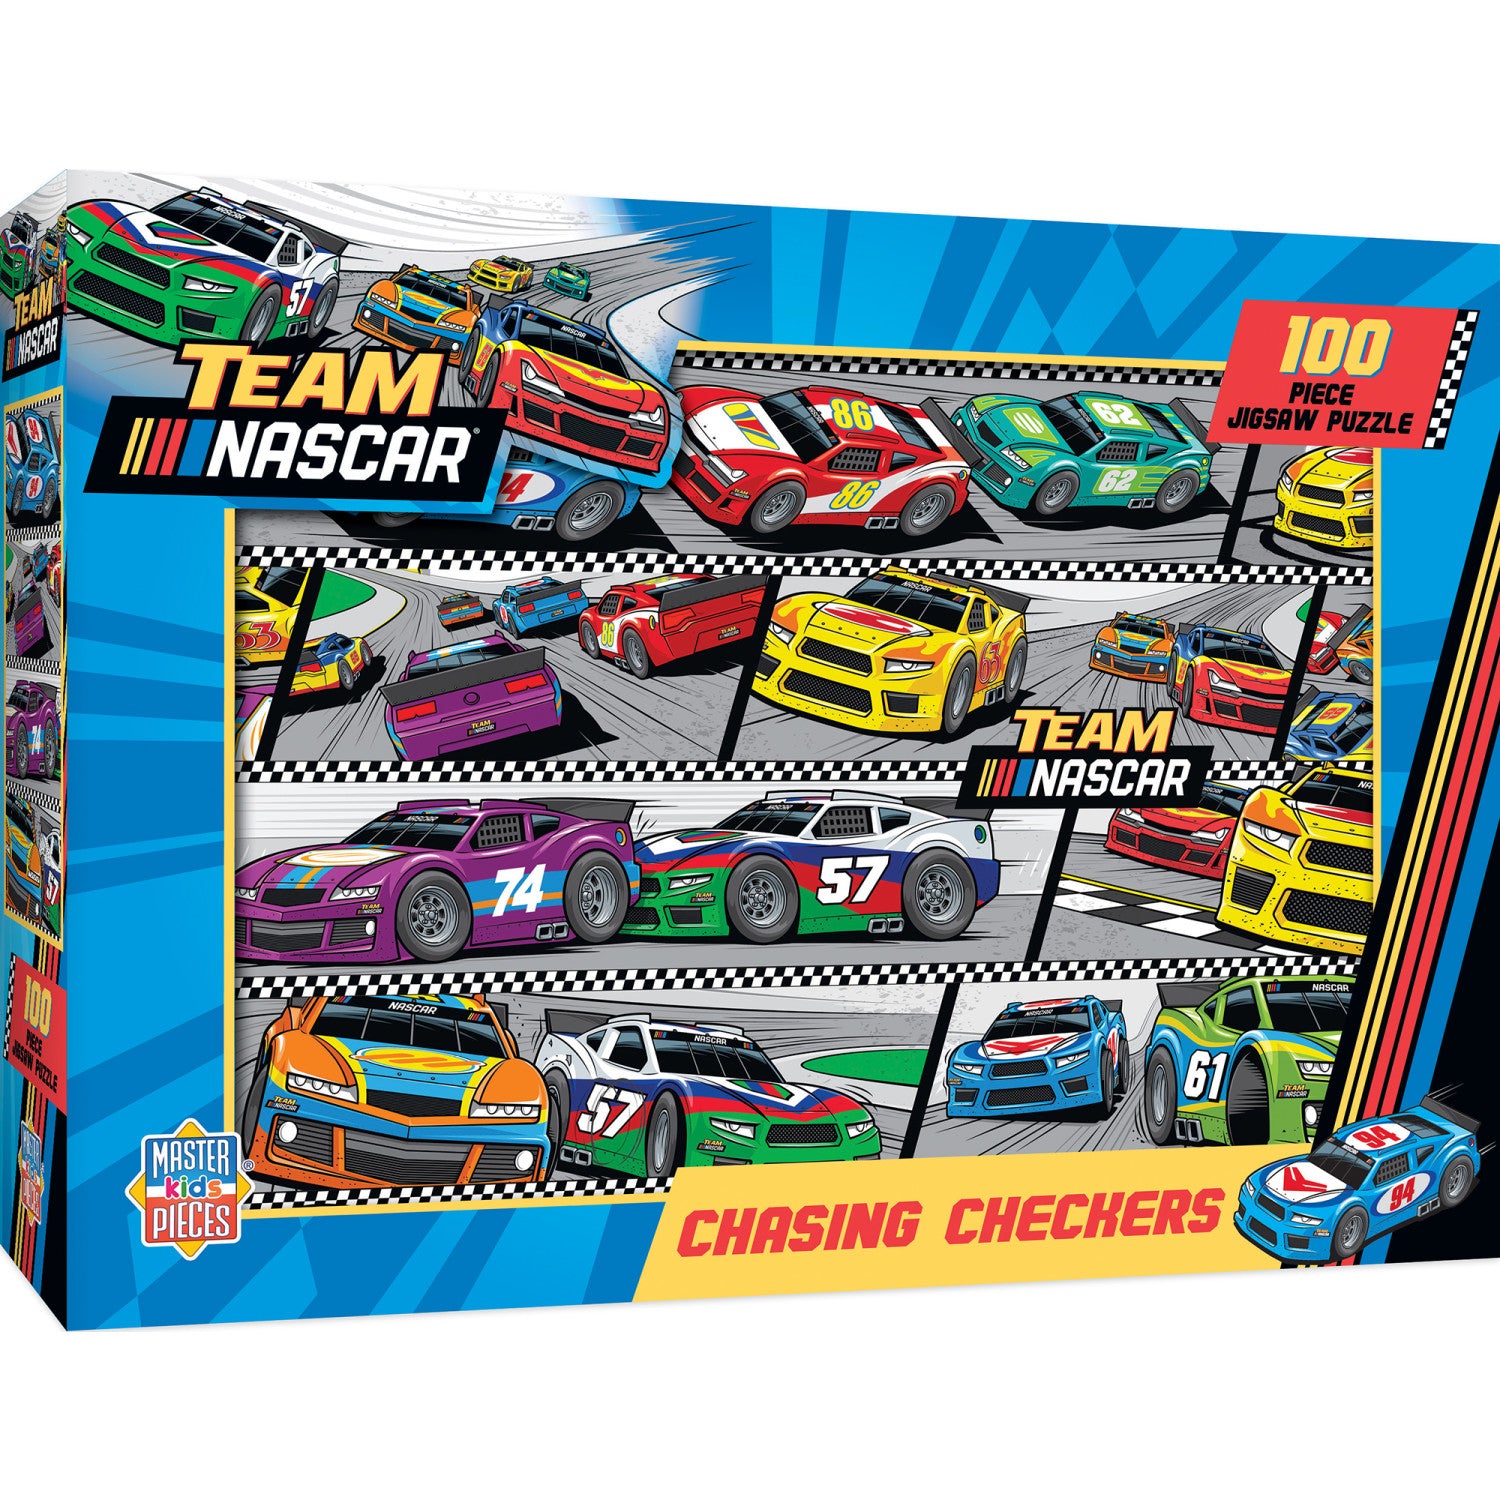 NASCAR - Chasing Checkers 100 Piece Jigsaw Puzzle